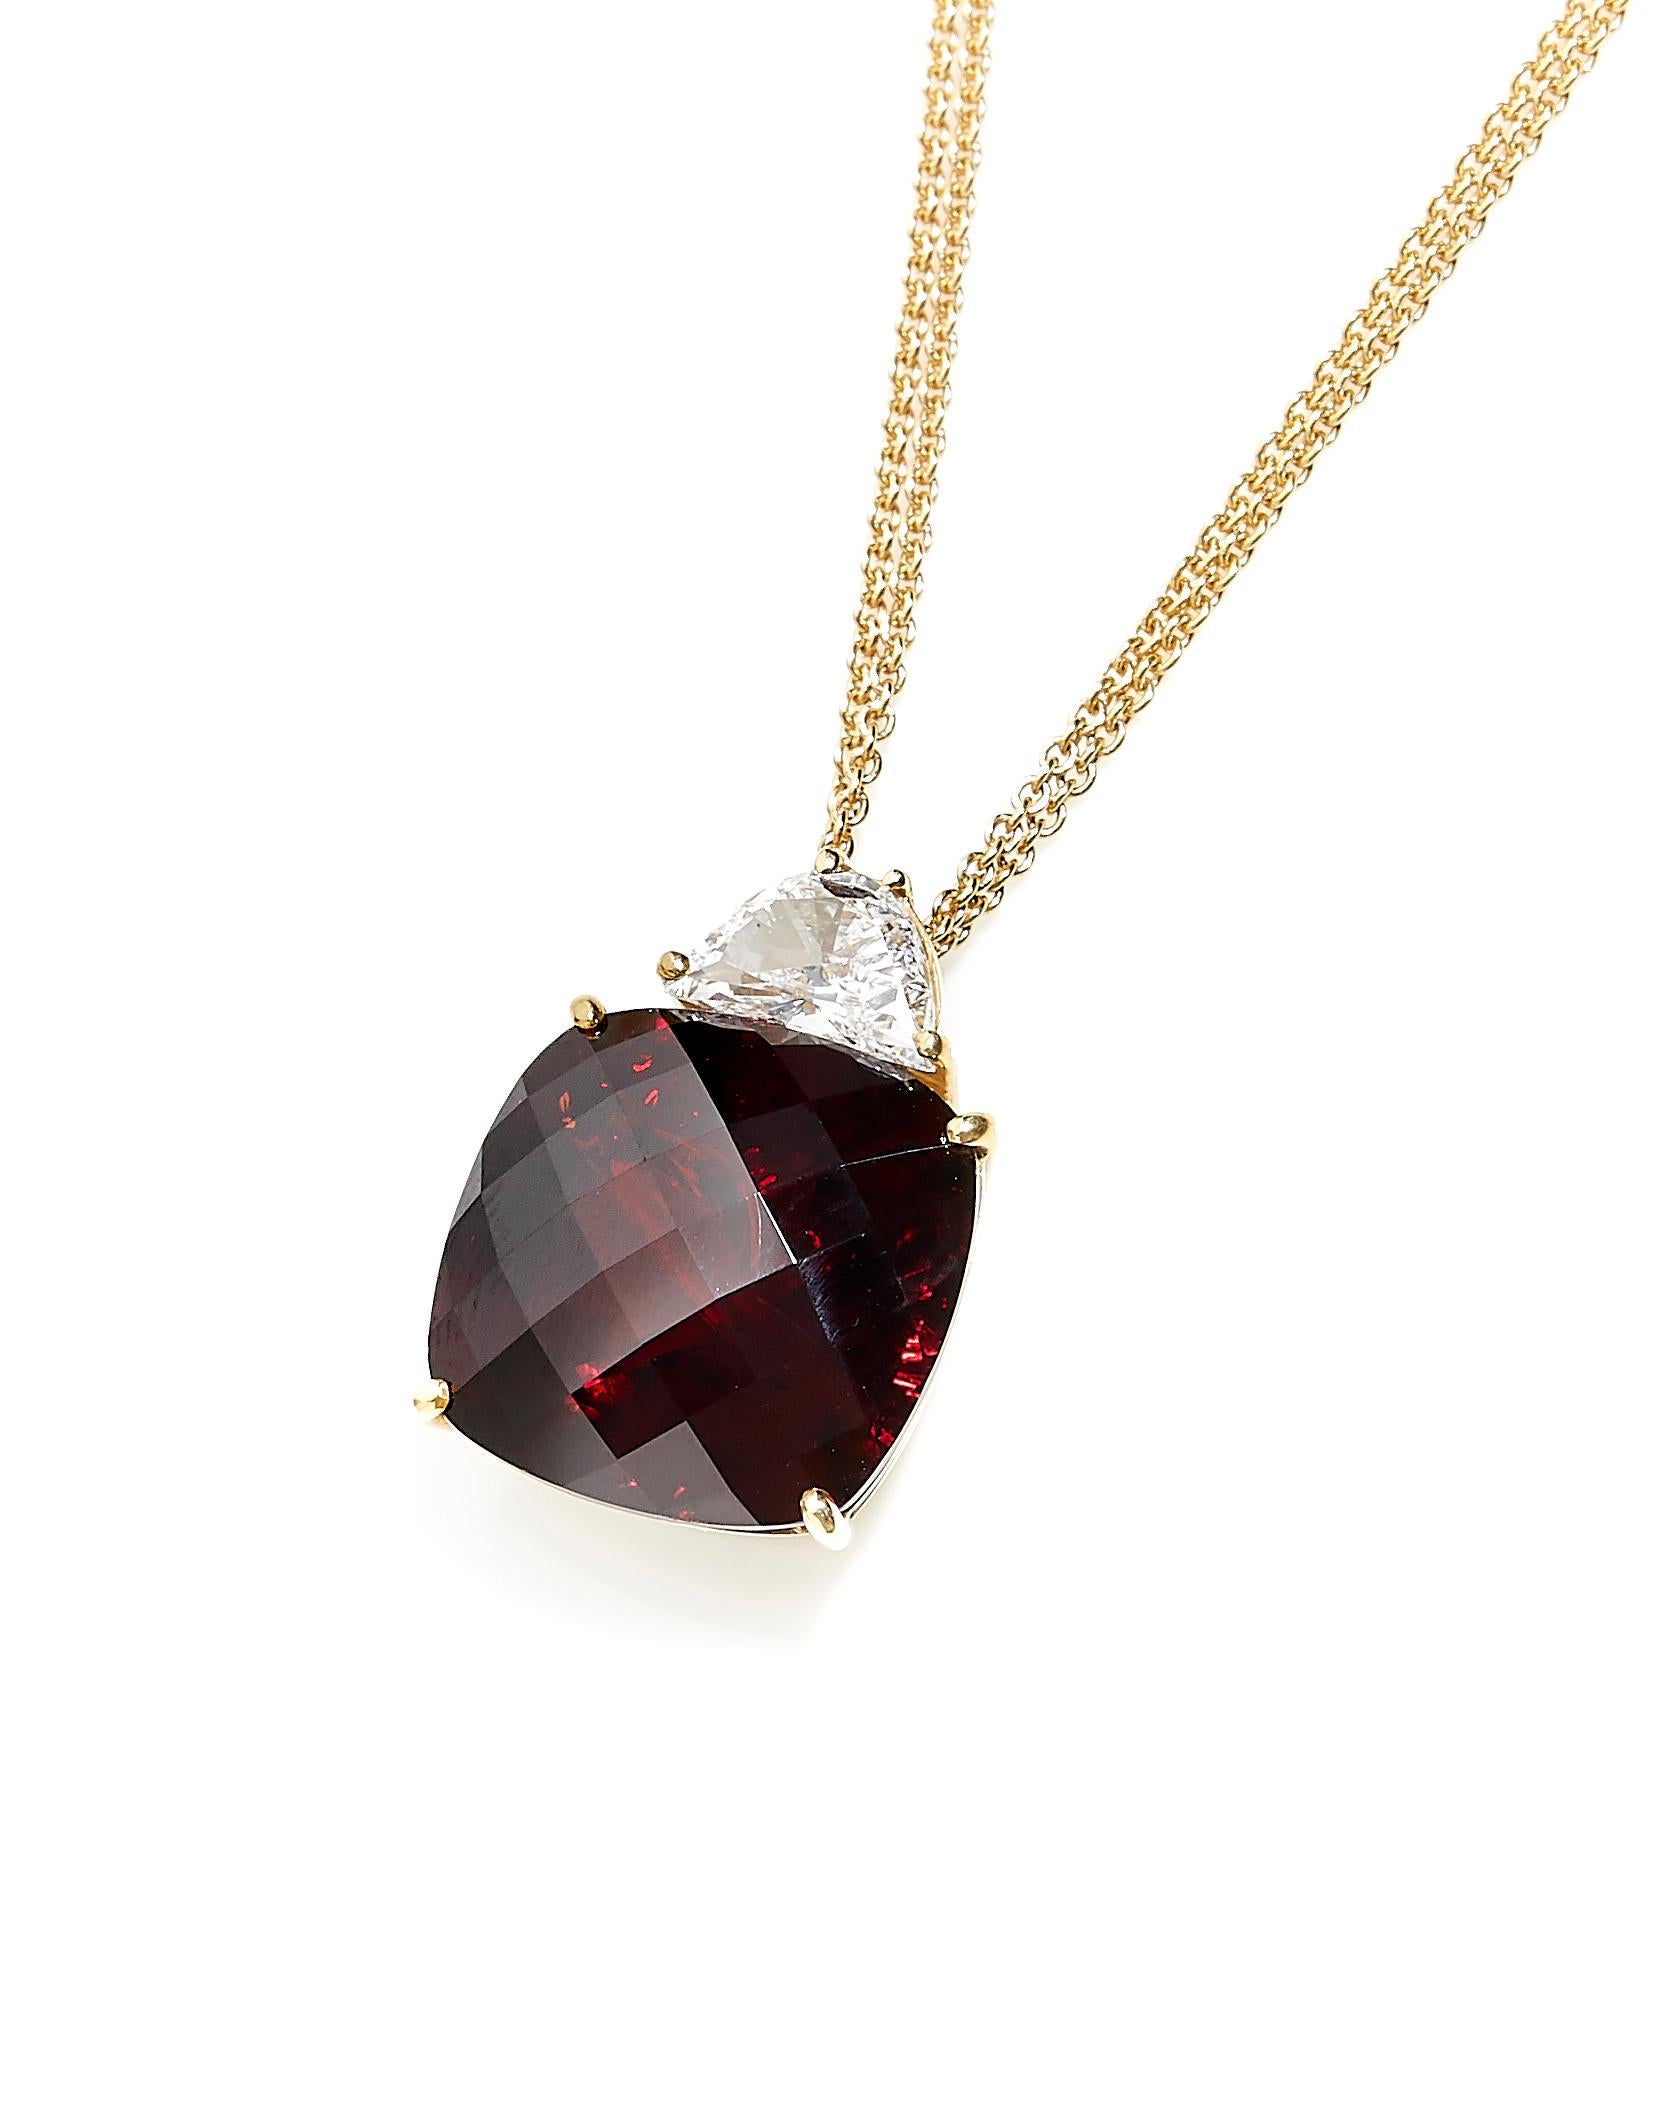 Contemporary 18 Karat Yellow Gold Pendant Necklace with 13.86 Carat Red Garnet and Diamond For Sale